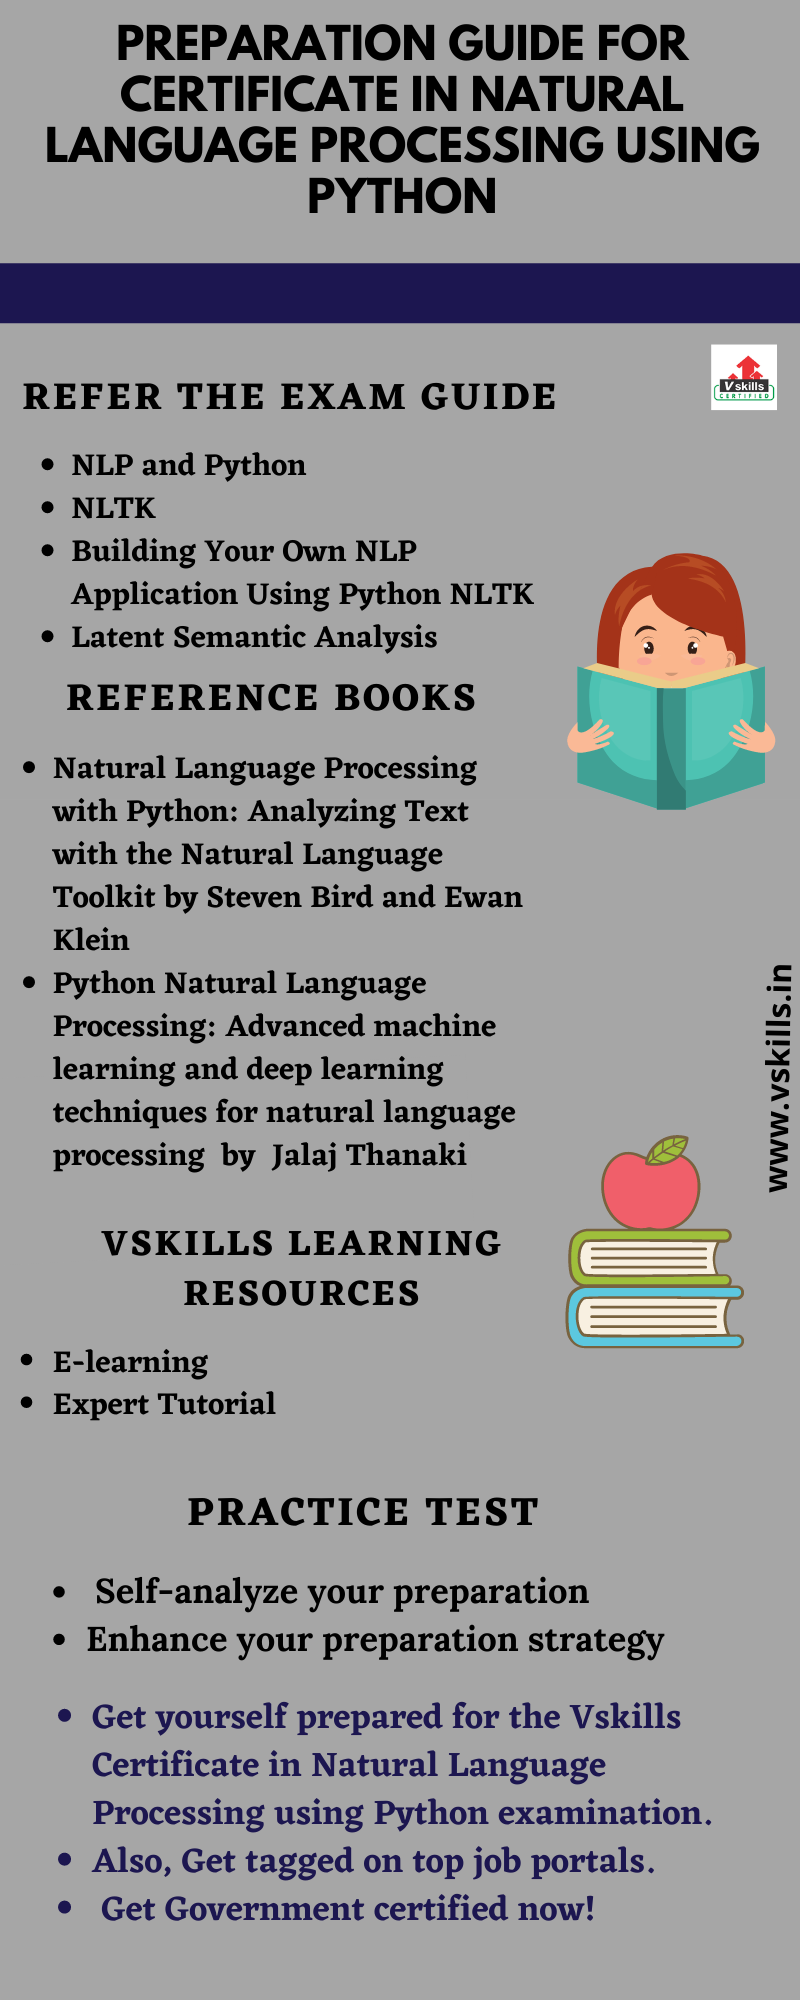 Preparation Guide for Vskills Certificate in Natural Language Processing using Python